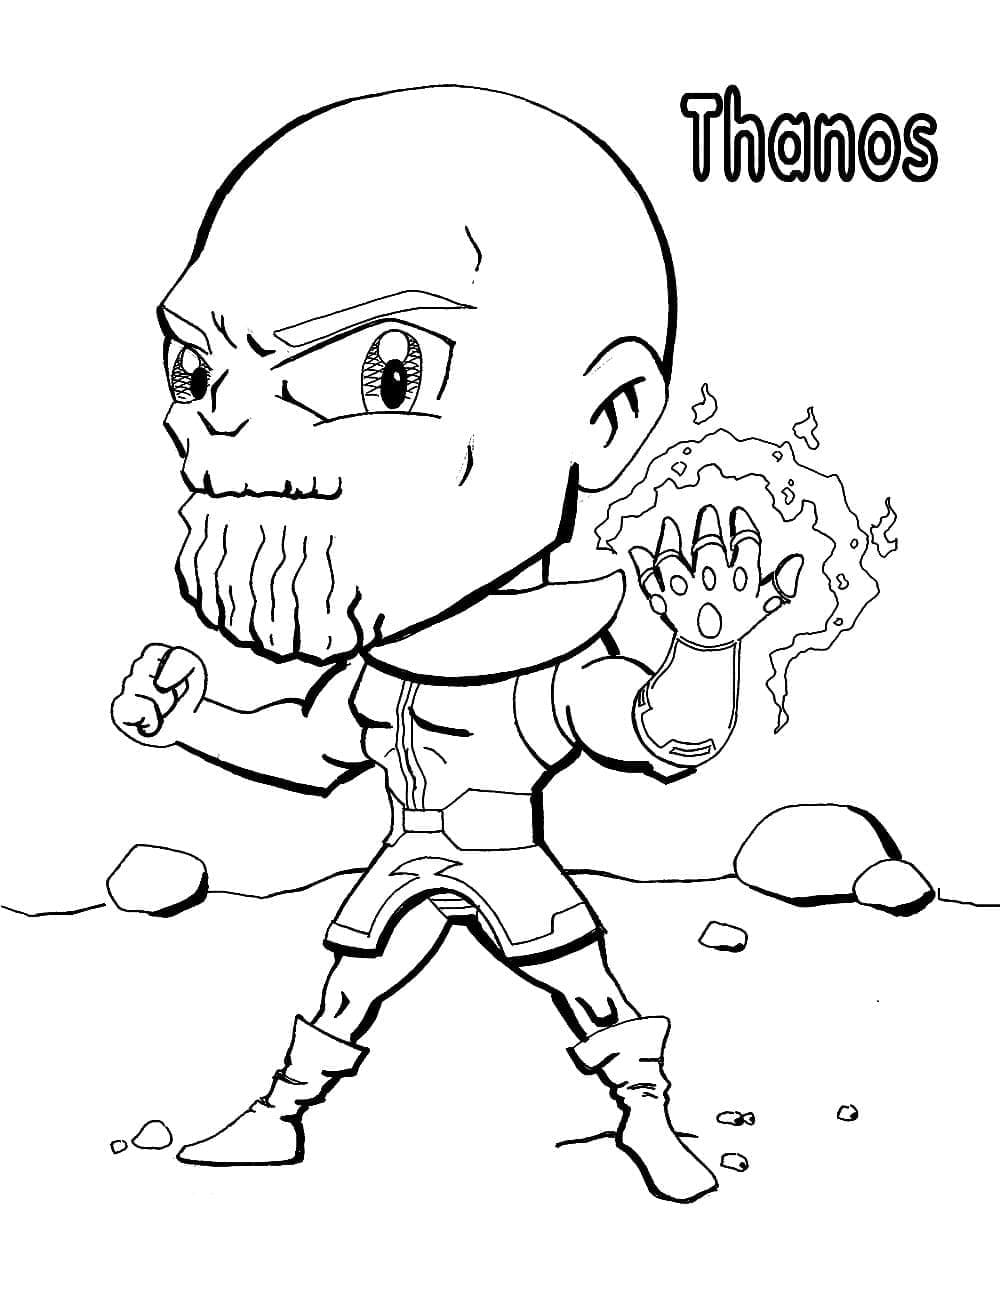 Thanos Adorable coloring page